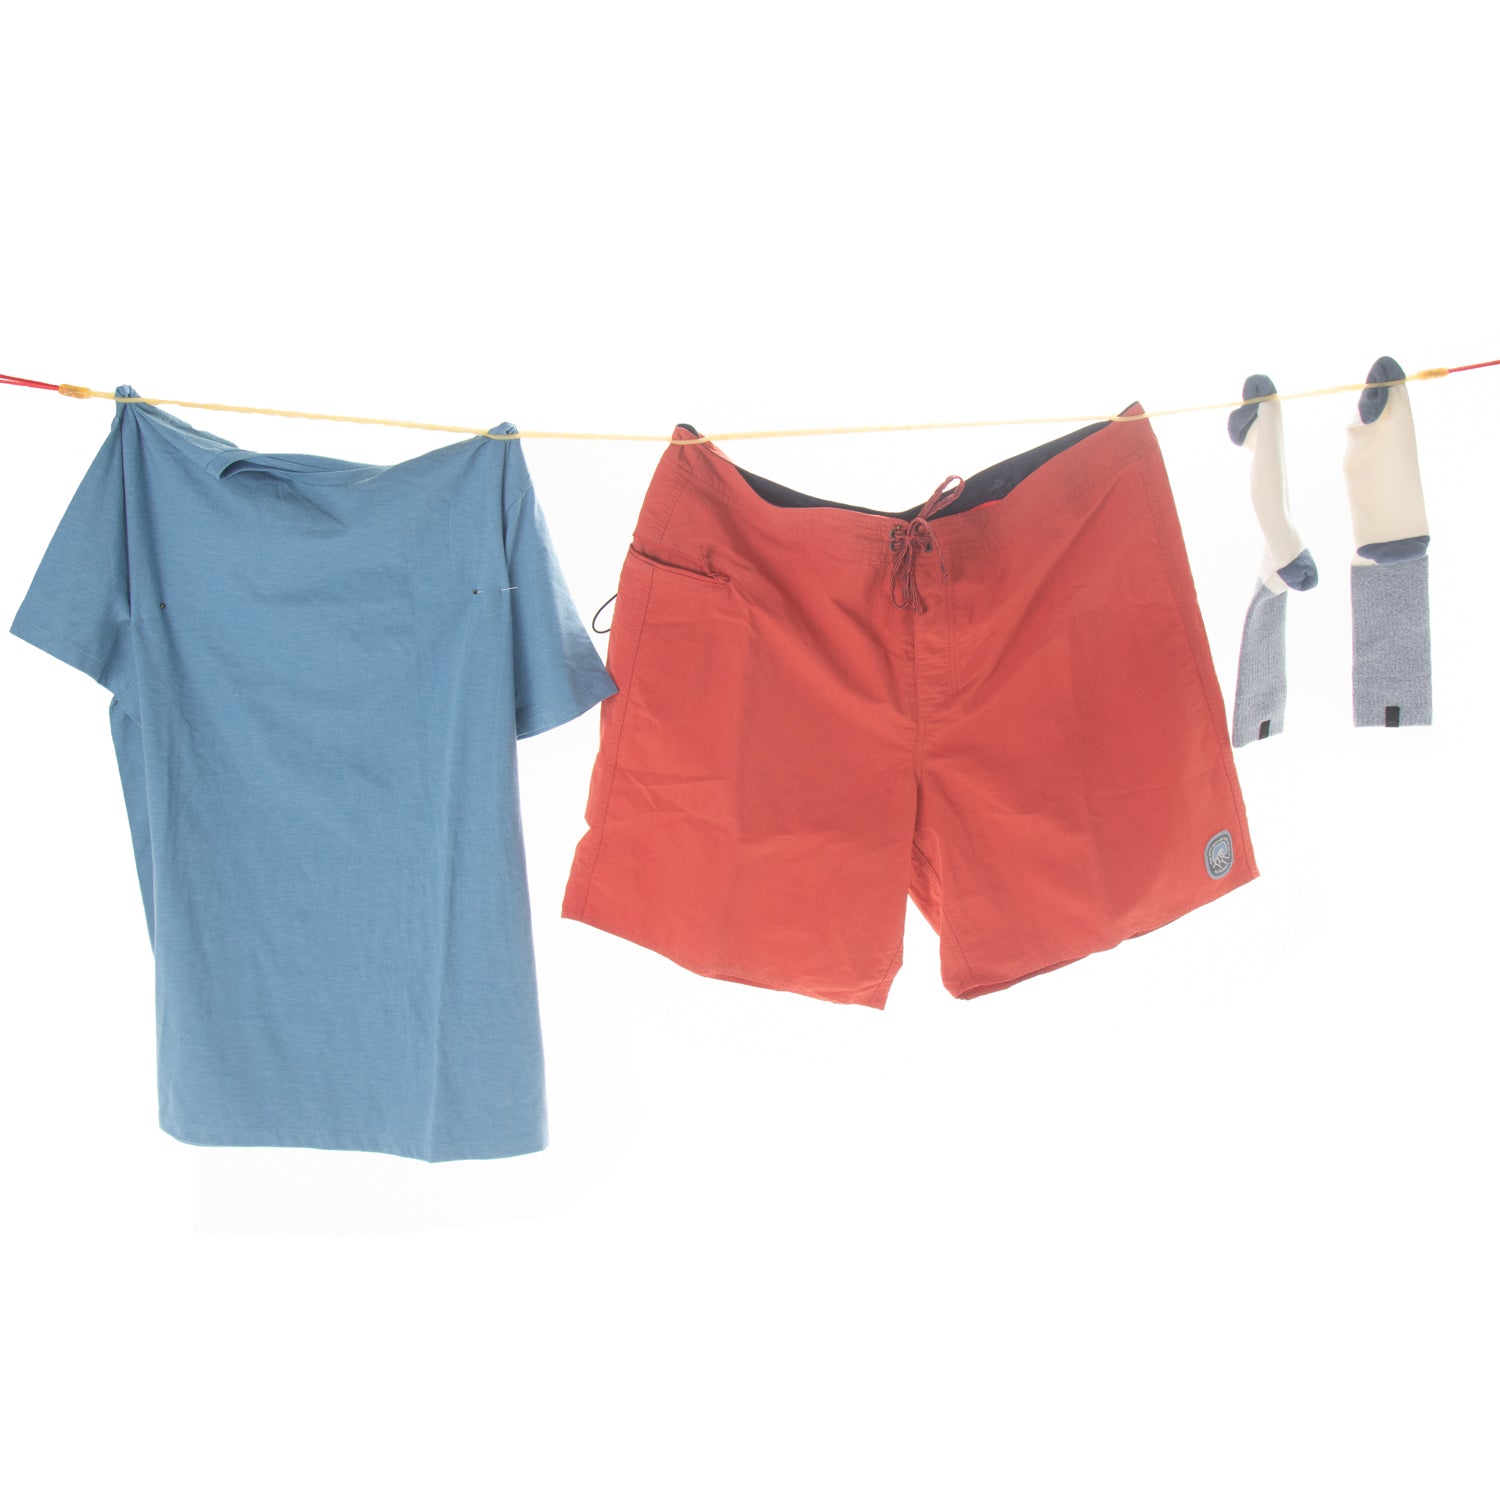 Travel clothesline perfect for drying laundry 